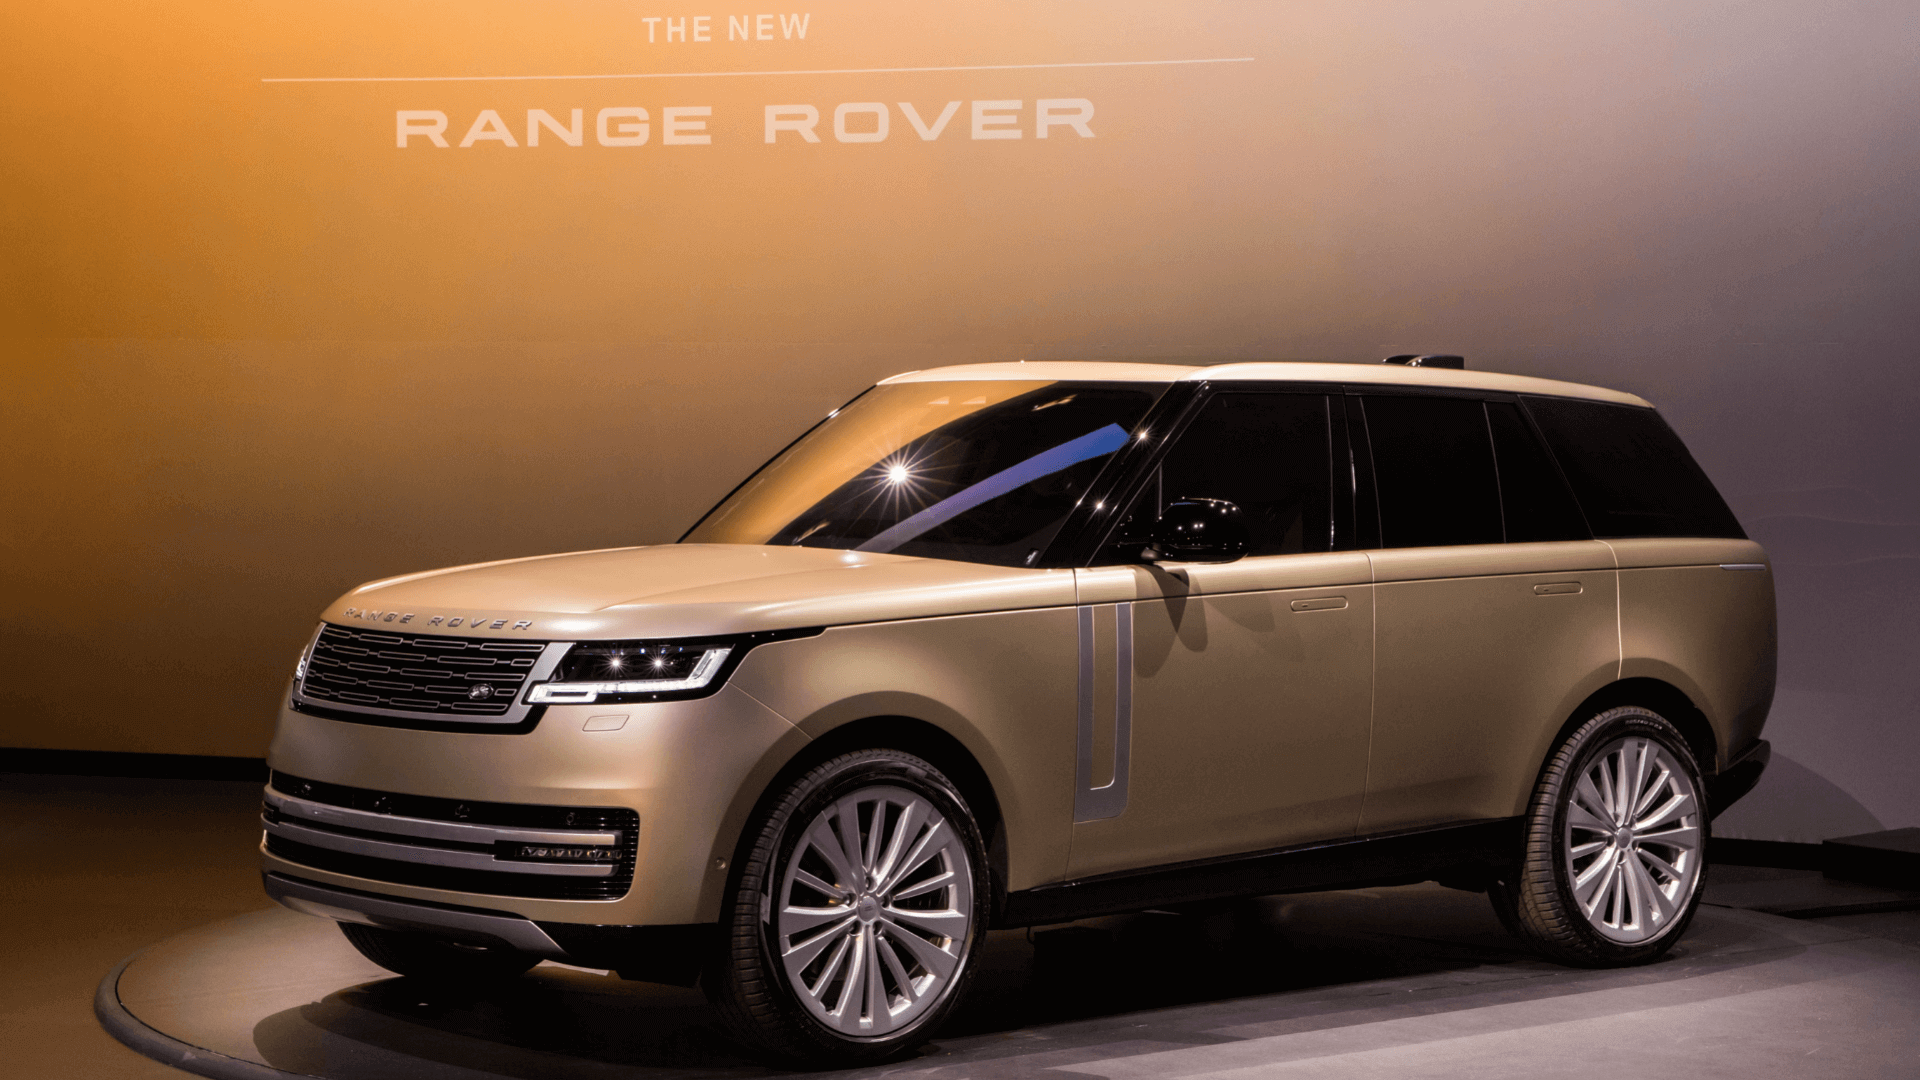 2022 Range Rover: the fifth installment of the off-road luxury symbol